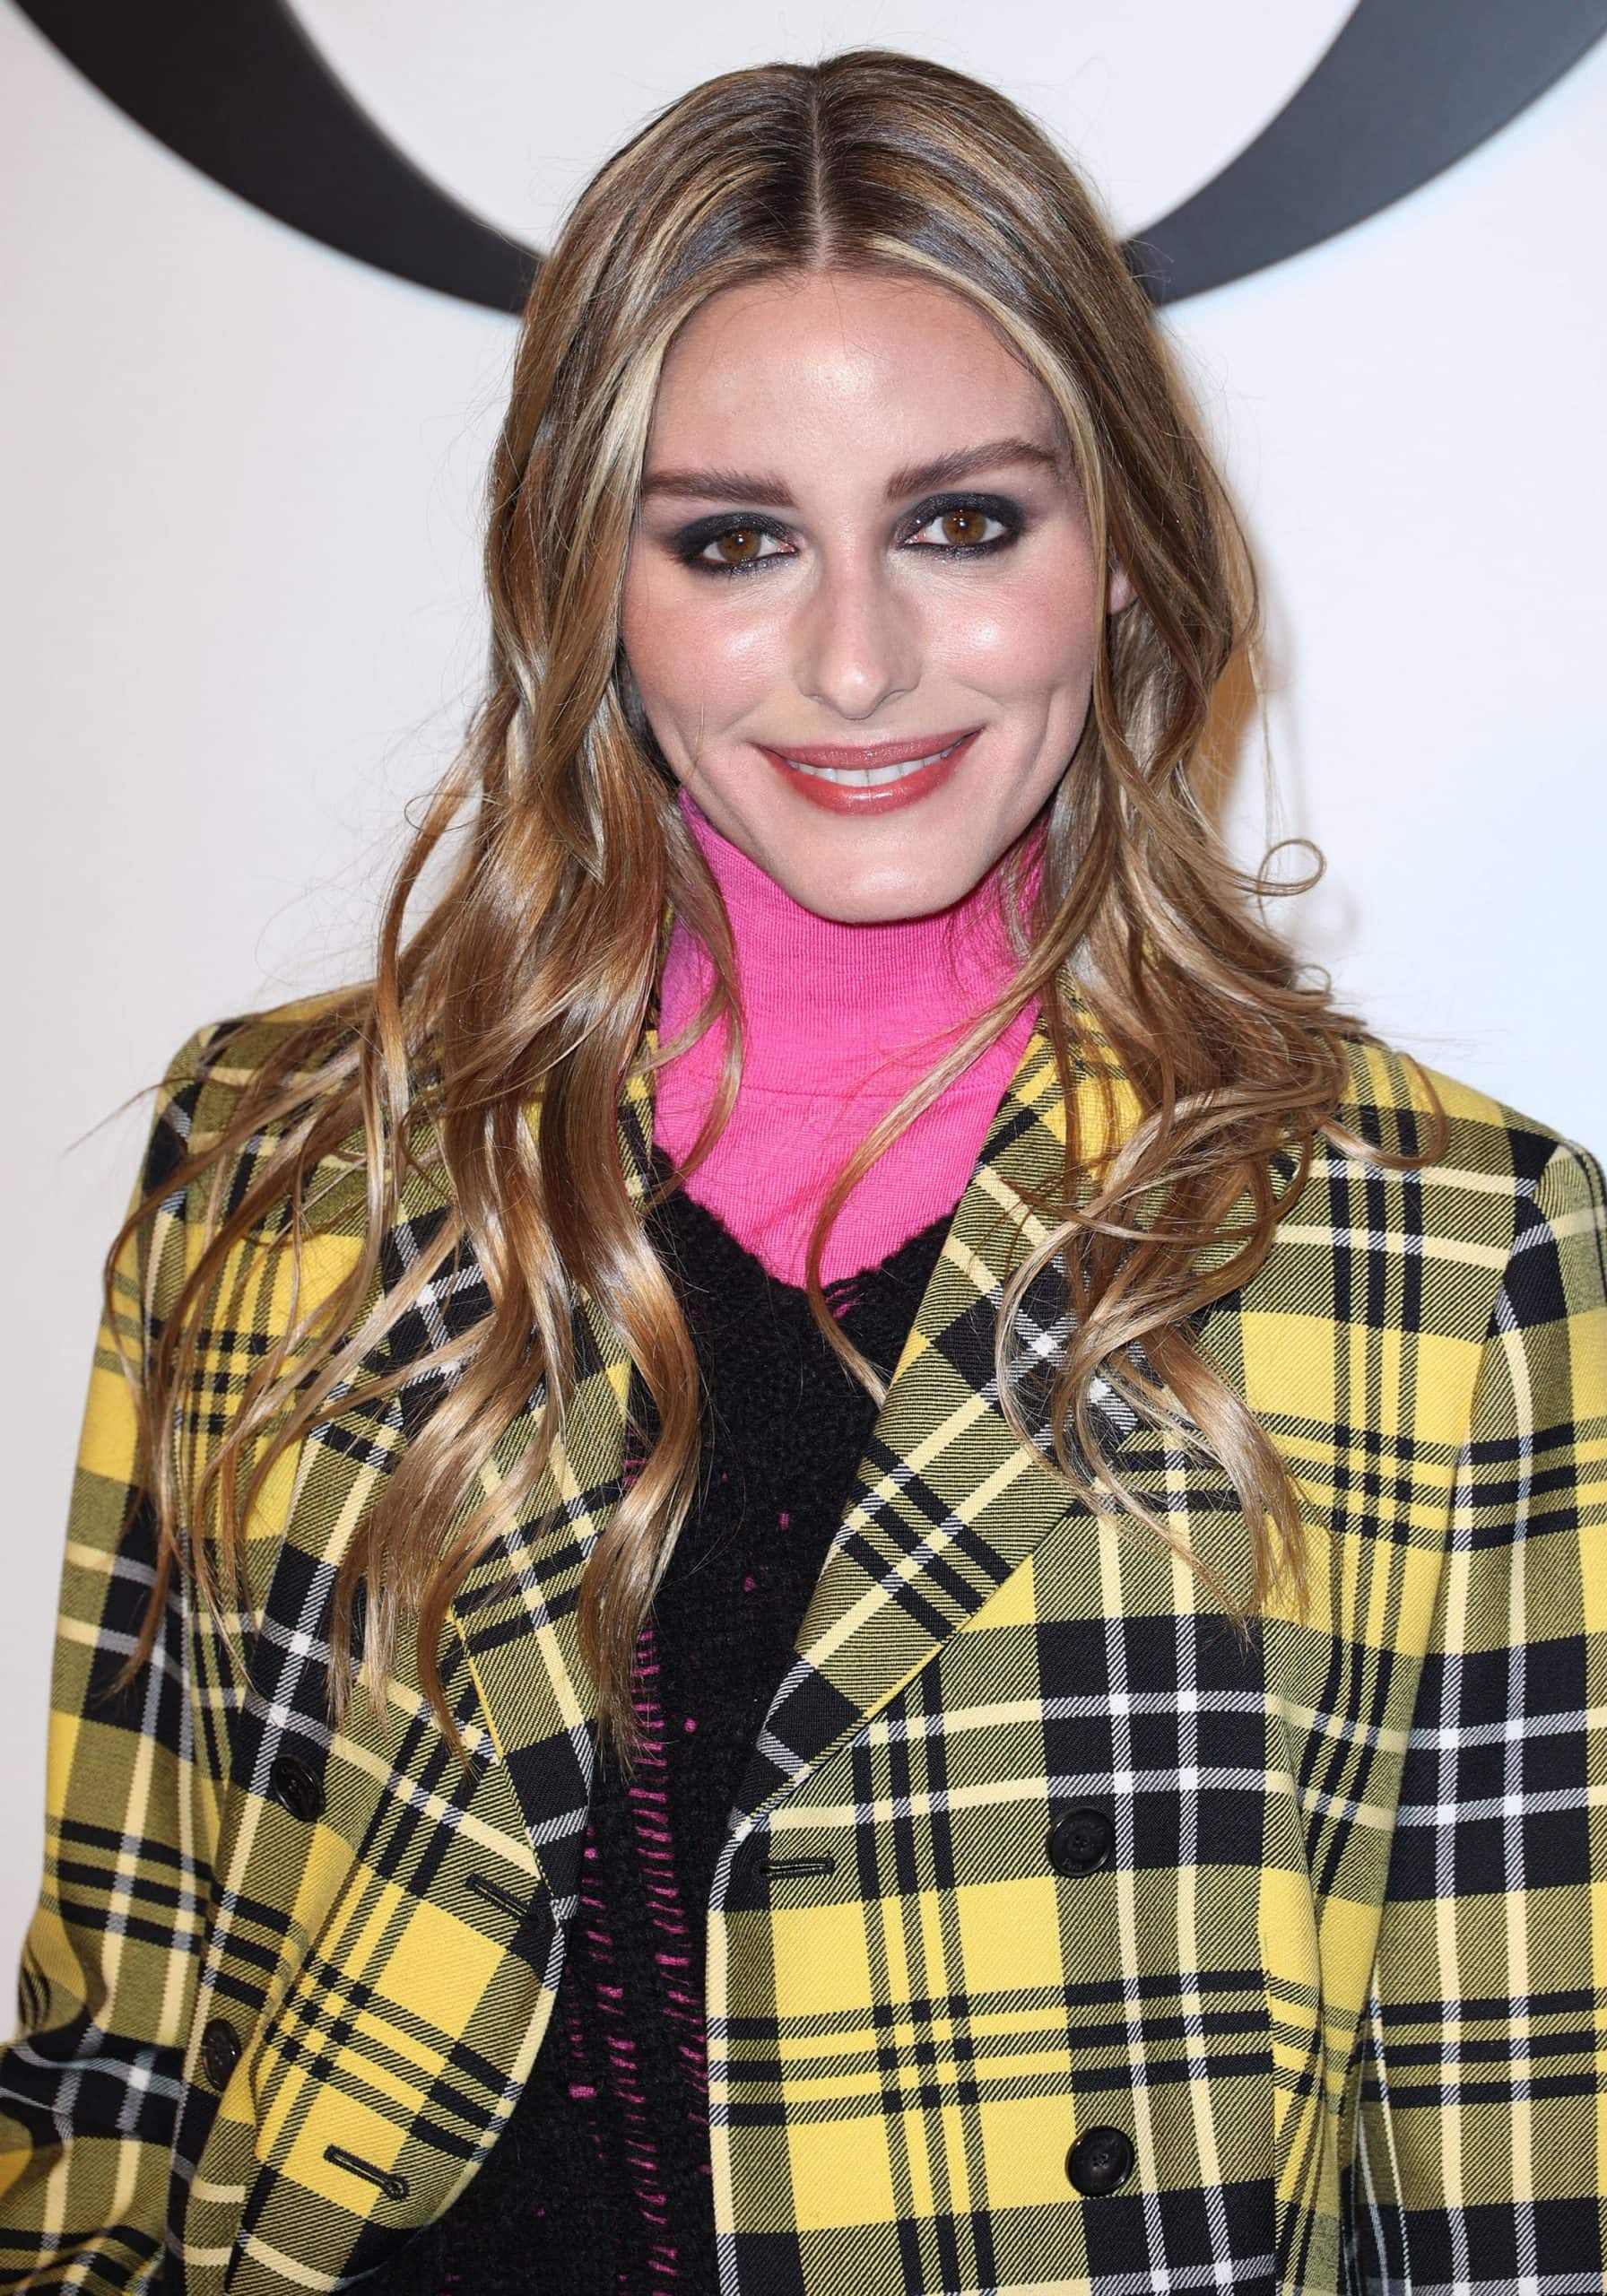 Olivia Palermo wears smokey eyeshadow and styles her tresses down in waves